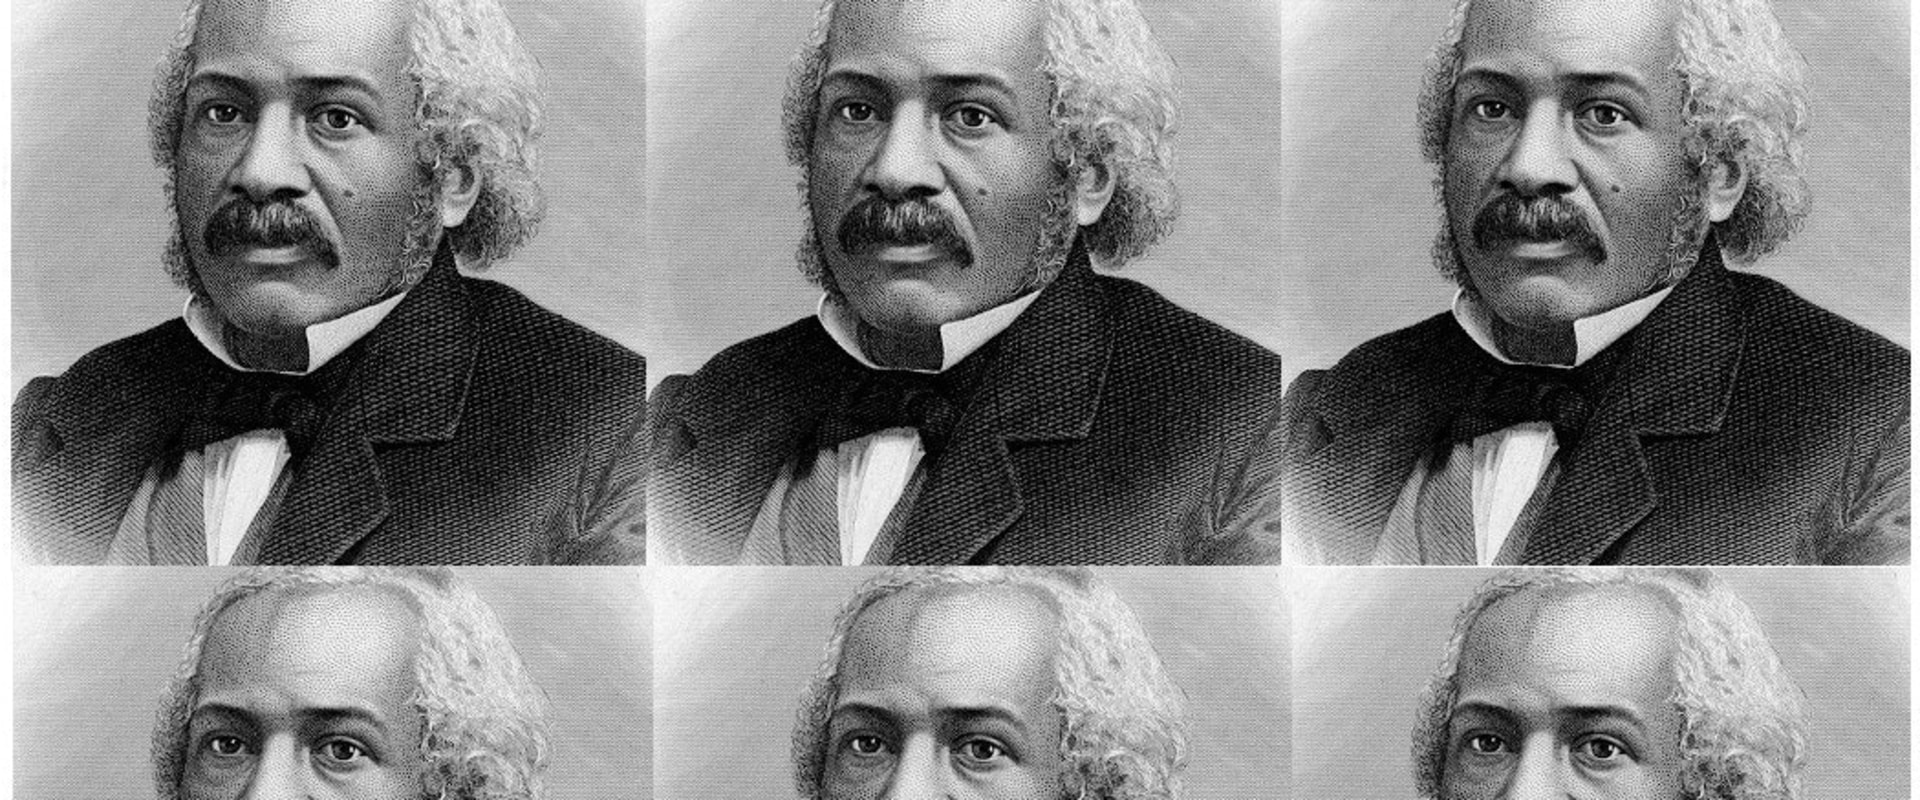 Who was the first black british doctor?